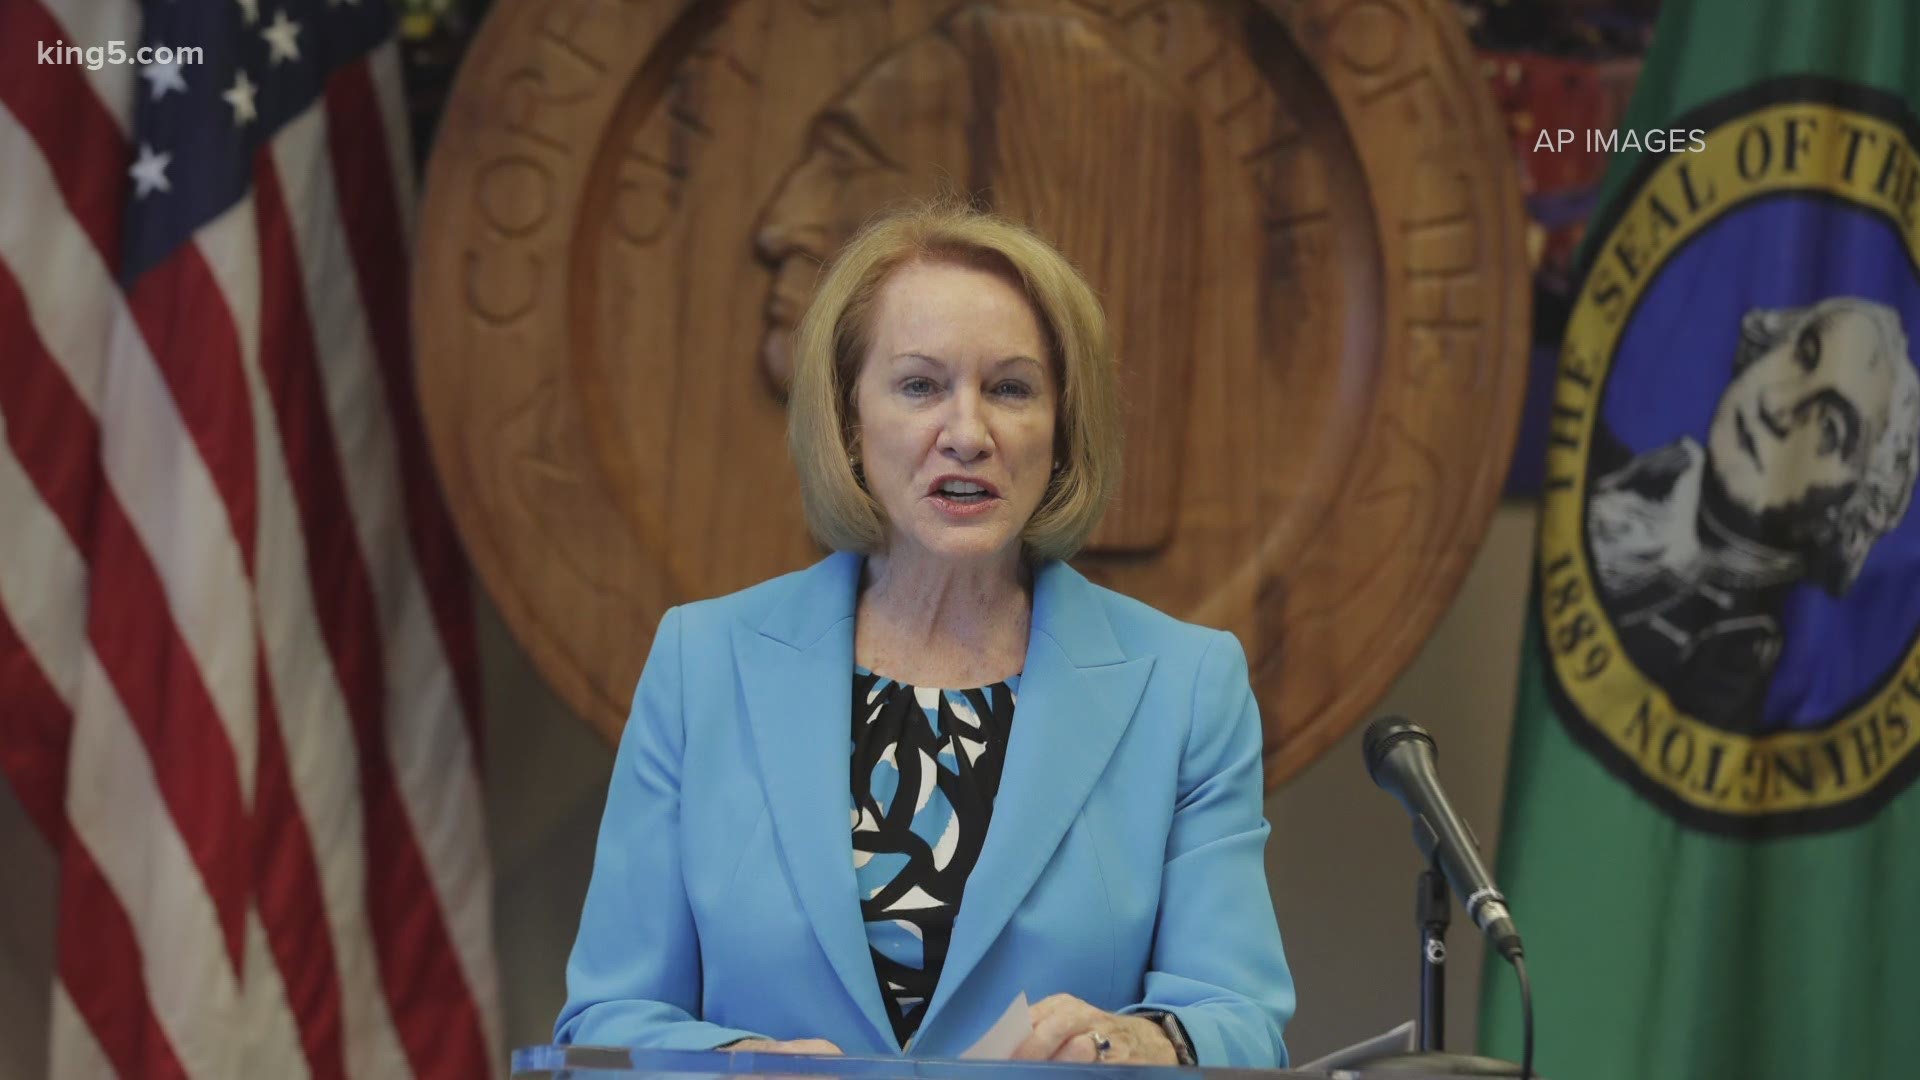 The recall effort blamed Durkan for the Seattle Police Department's indiscriminate use of tear gas during recent antiracism and anti-police protests.